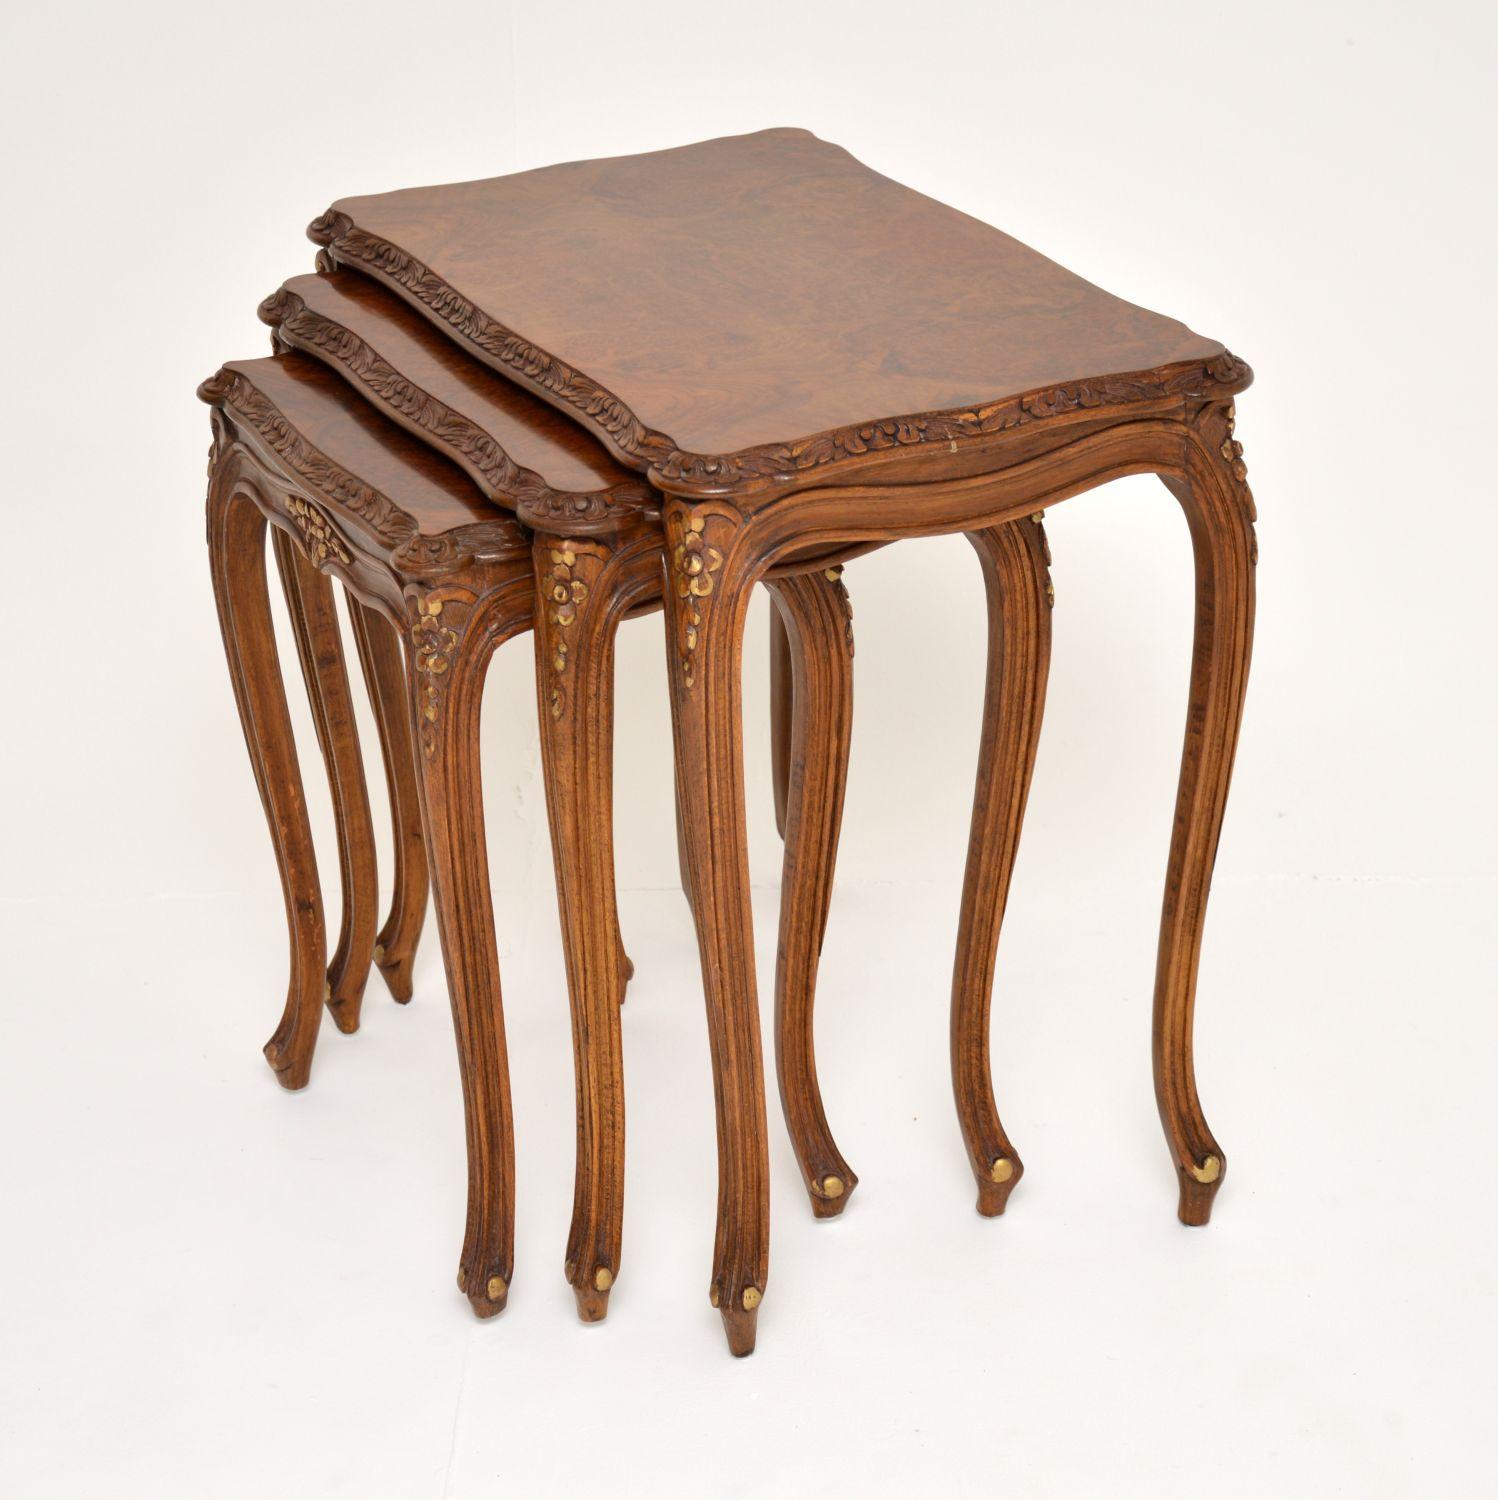 Antique French Burr Walnut Nest of Tables In Good Condition For Sale In London, GB